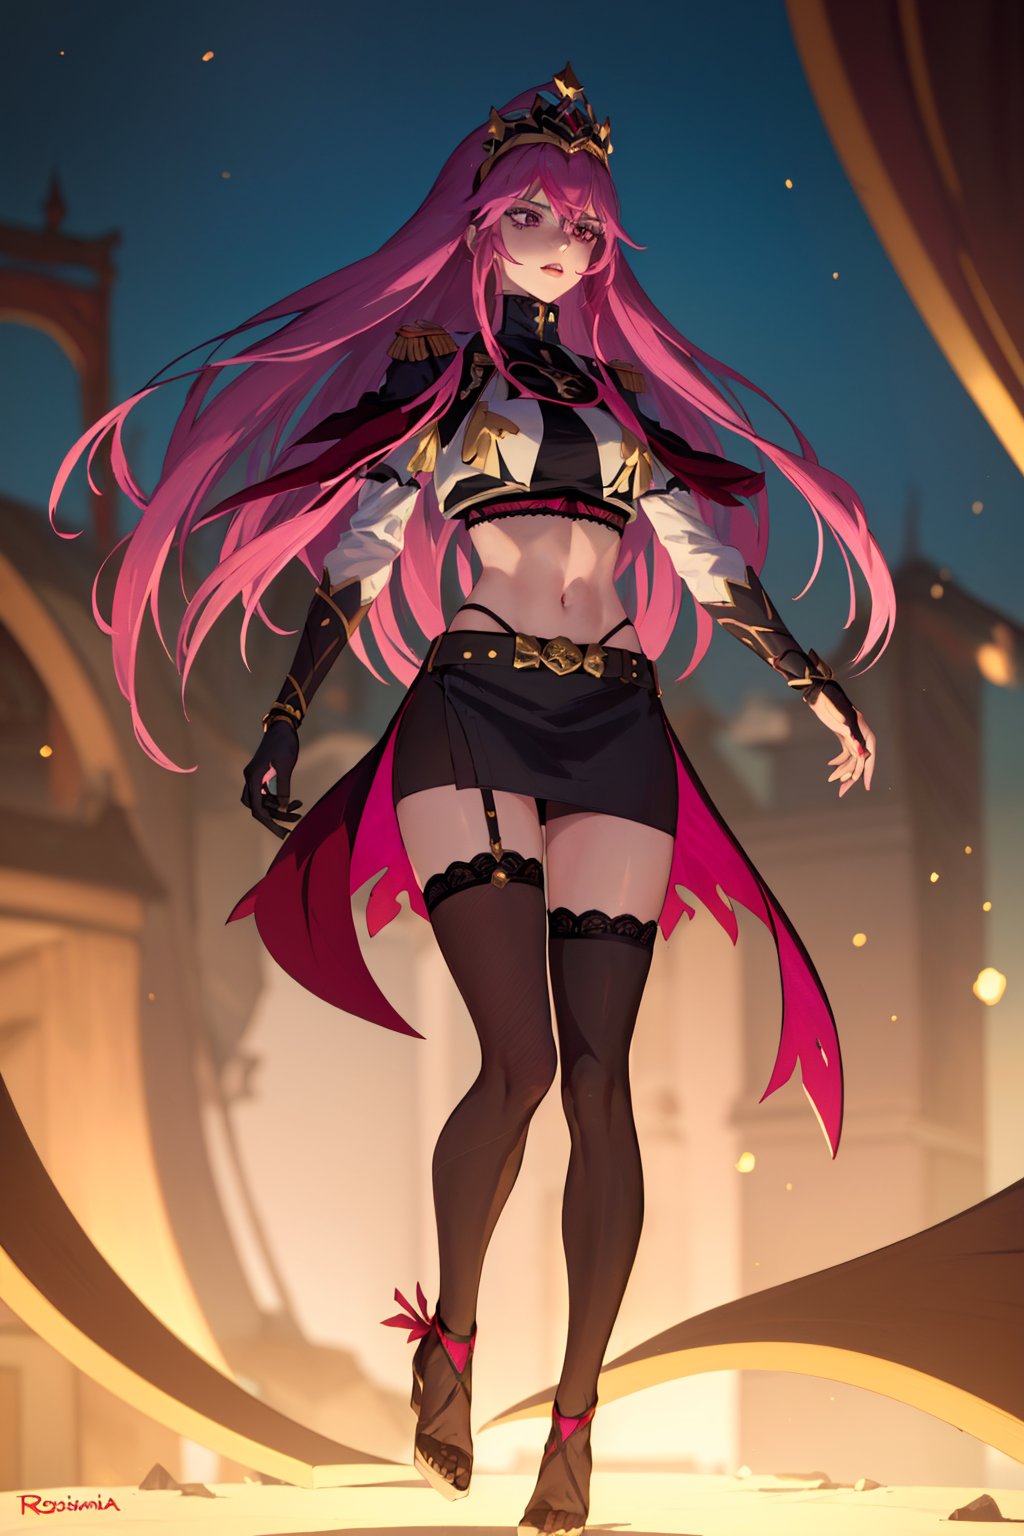 an accurate and detailed full body shot of a young adult female character named Rosaltis, a determined and mysterious aura, (Long flowing magenta hair with pink highlights:1.5), violet-indigo eyes, Seductive makeup, defined lips, (Imperial Veil Crown:1.3), (a white high collar crop top:1.7), (a gothic lace corset underneath crop top:1.4), (Long black opera gloves:1.1), (gold bracers:1.2), (A long black slit-skirt:1.3), Fishnet stockings, Red and gold garter belts, (knee-high Soft-knit wedge heels:1.2), A black belt with various trinkets, Flowing red ribbons, gold accent jewelry, masterpiece, high quality, 4K, rosaria(genshin impact), jessie pokemon, Altair Recreators<lora:EMS-12256-EMS:0.500000>, <lora:EMS-36230-EMS:0.600000>, <lora:EMS-259677-EMS:0.700000>